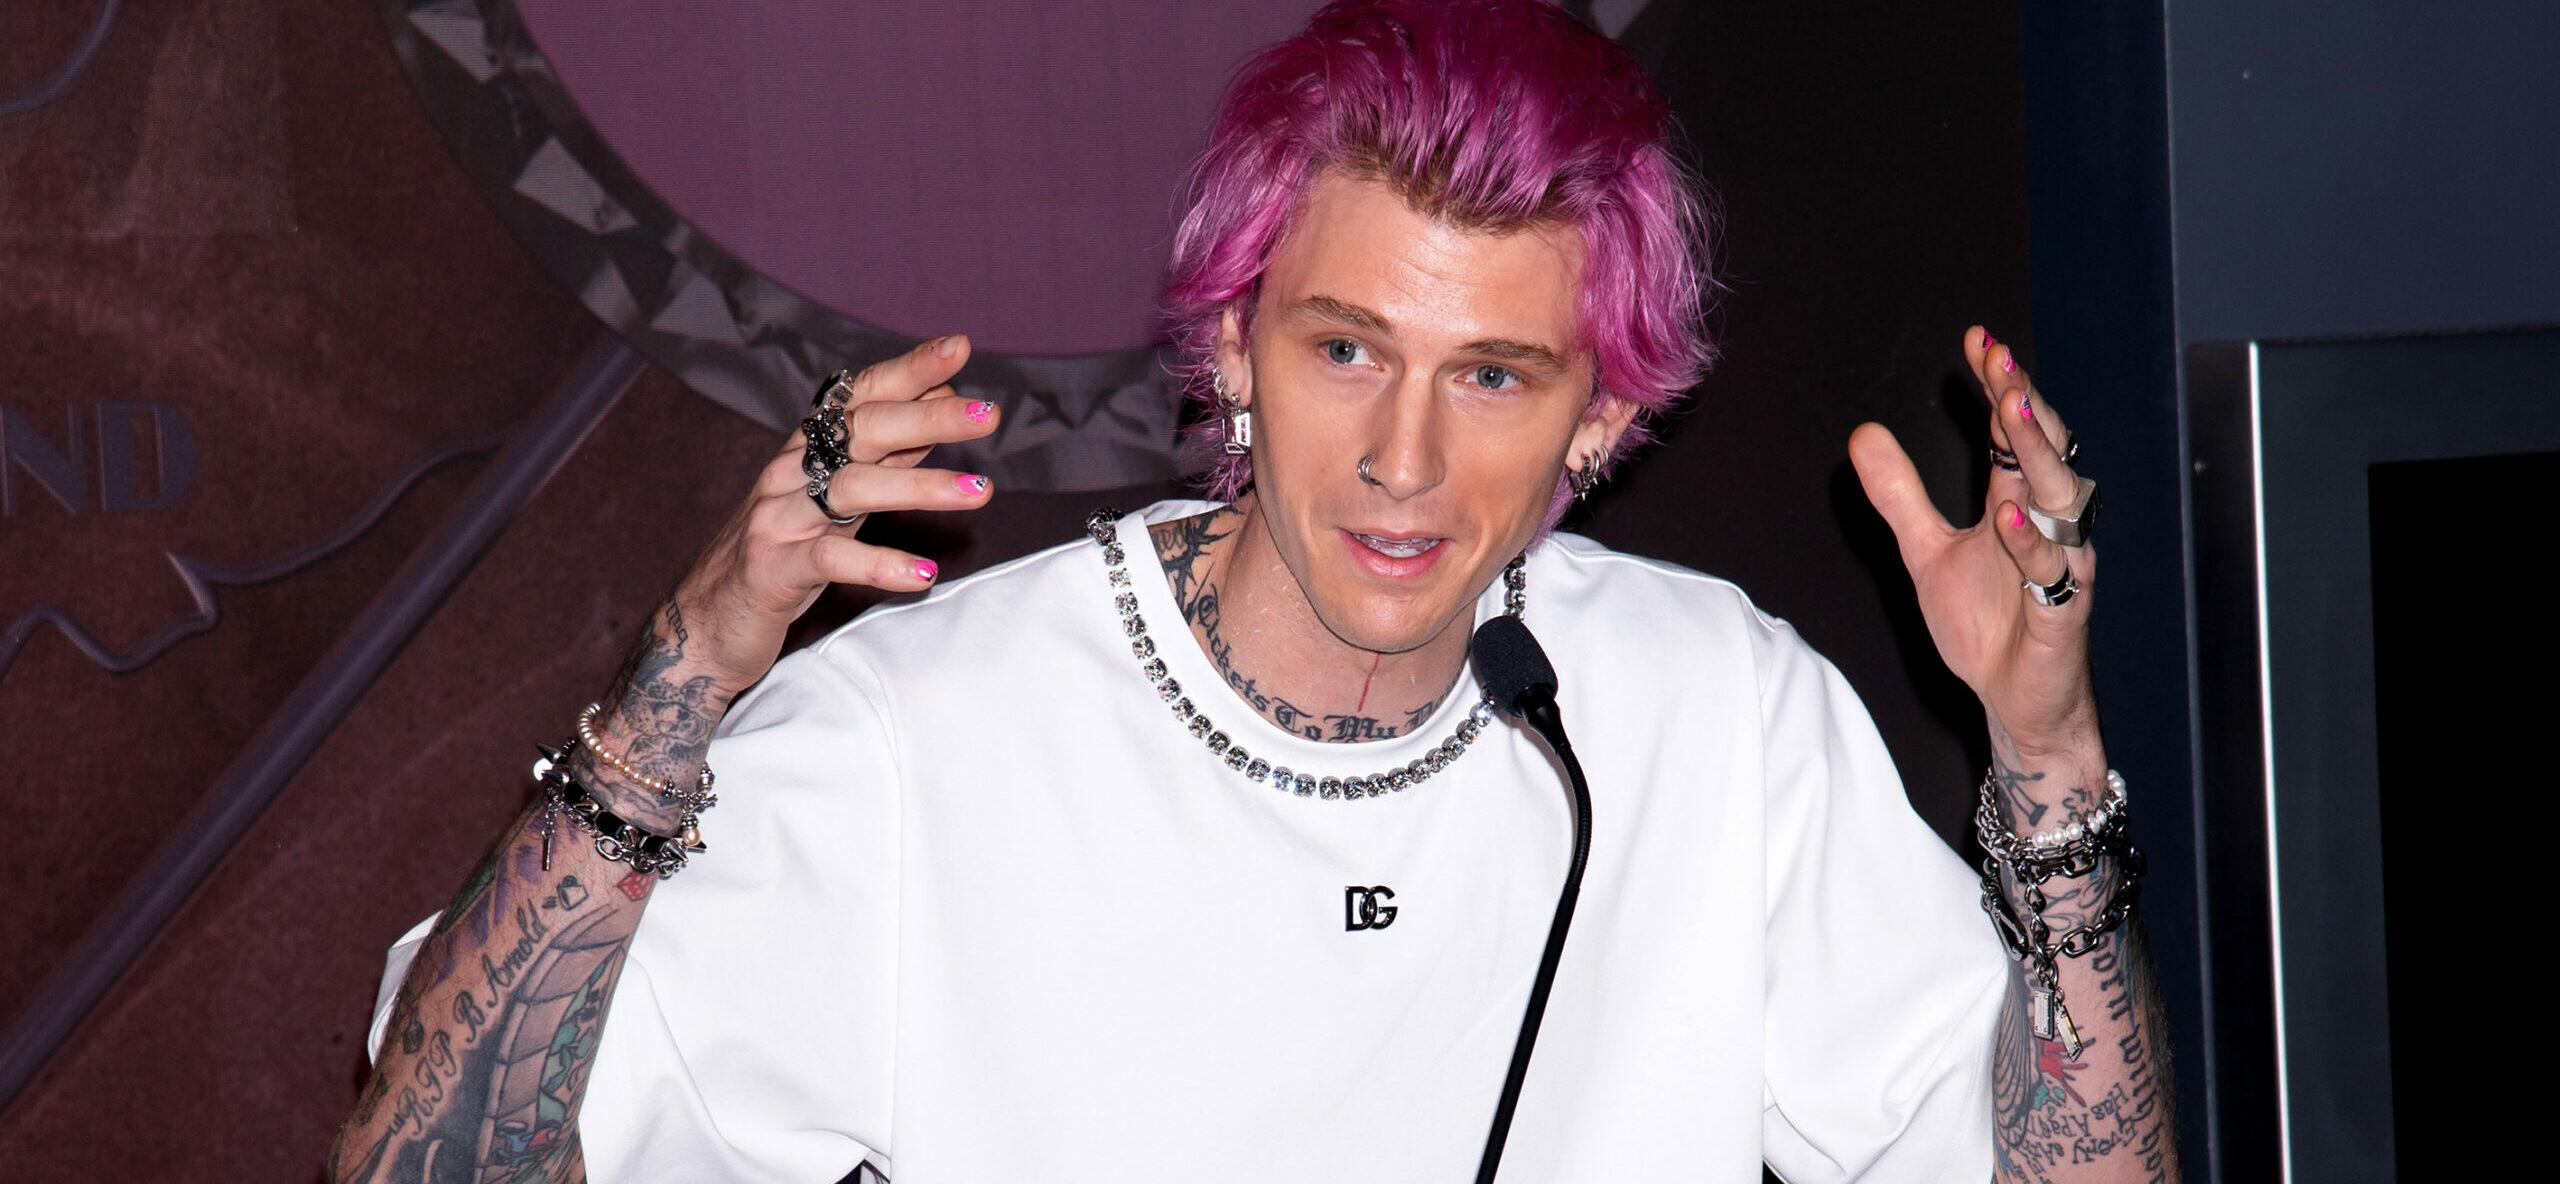 Machine Gun Kelly Gushes Blood After Party Trick Gone Awry